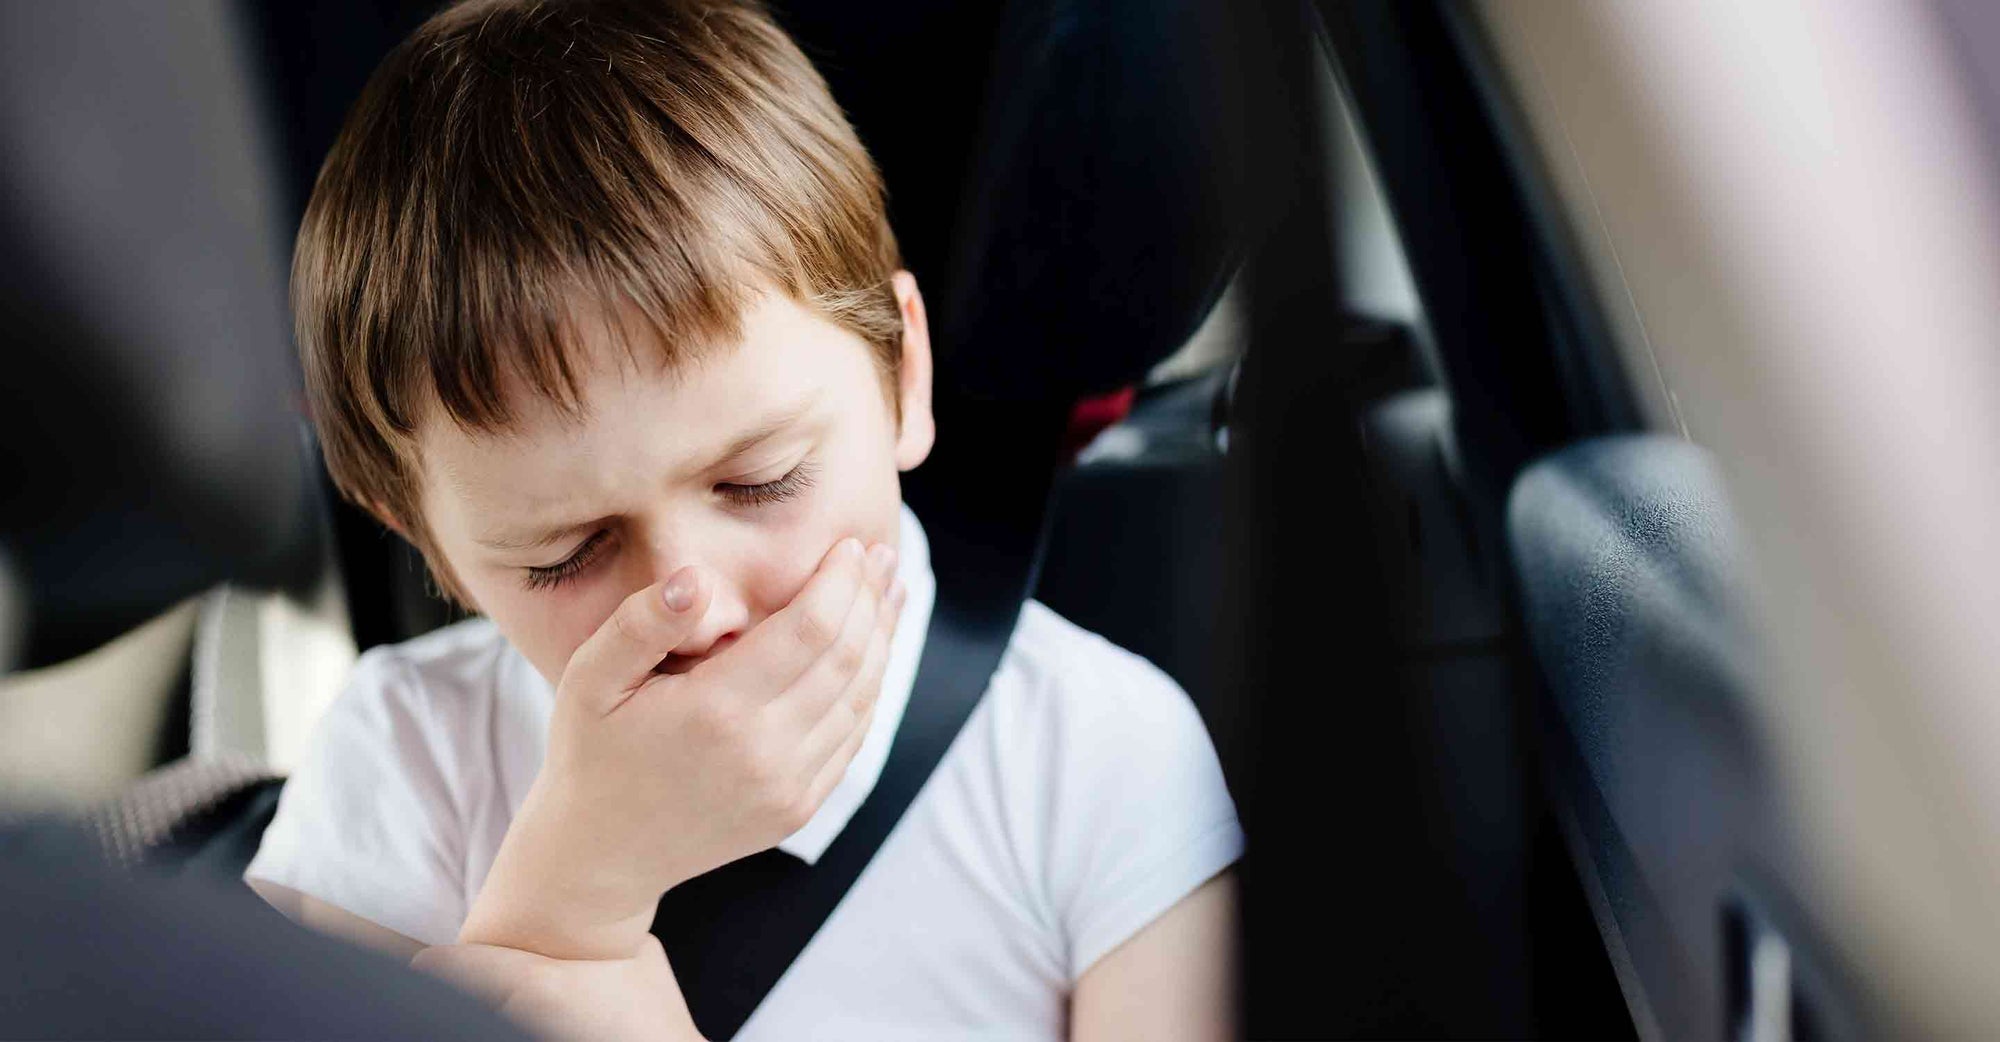 Kid coughing in the back seat of a car